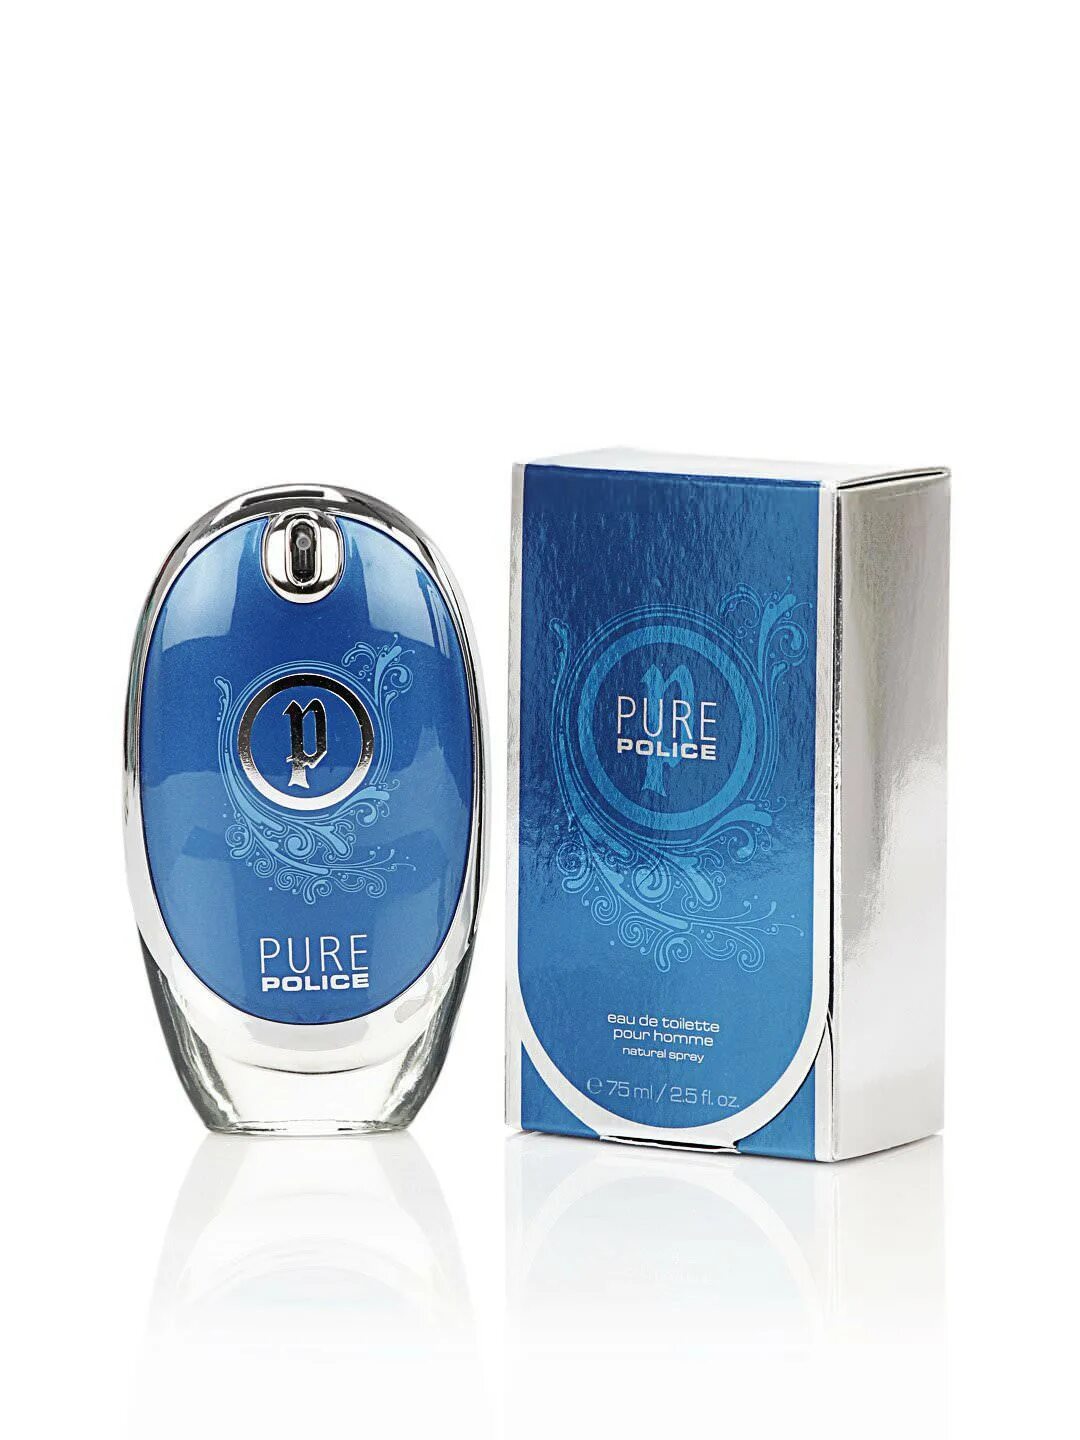 Pure homme. Pure Police духи женские. Альпа Пьюр Хомме. Police Pure DNA femme. Night Lure Pure homme.